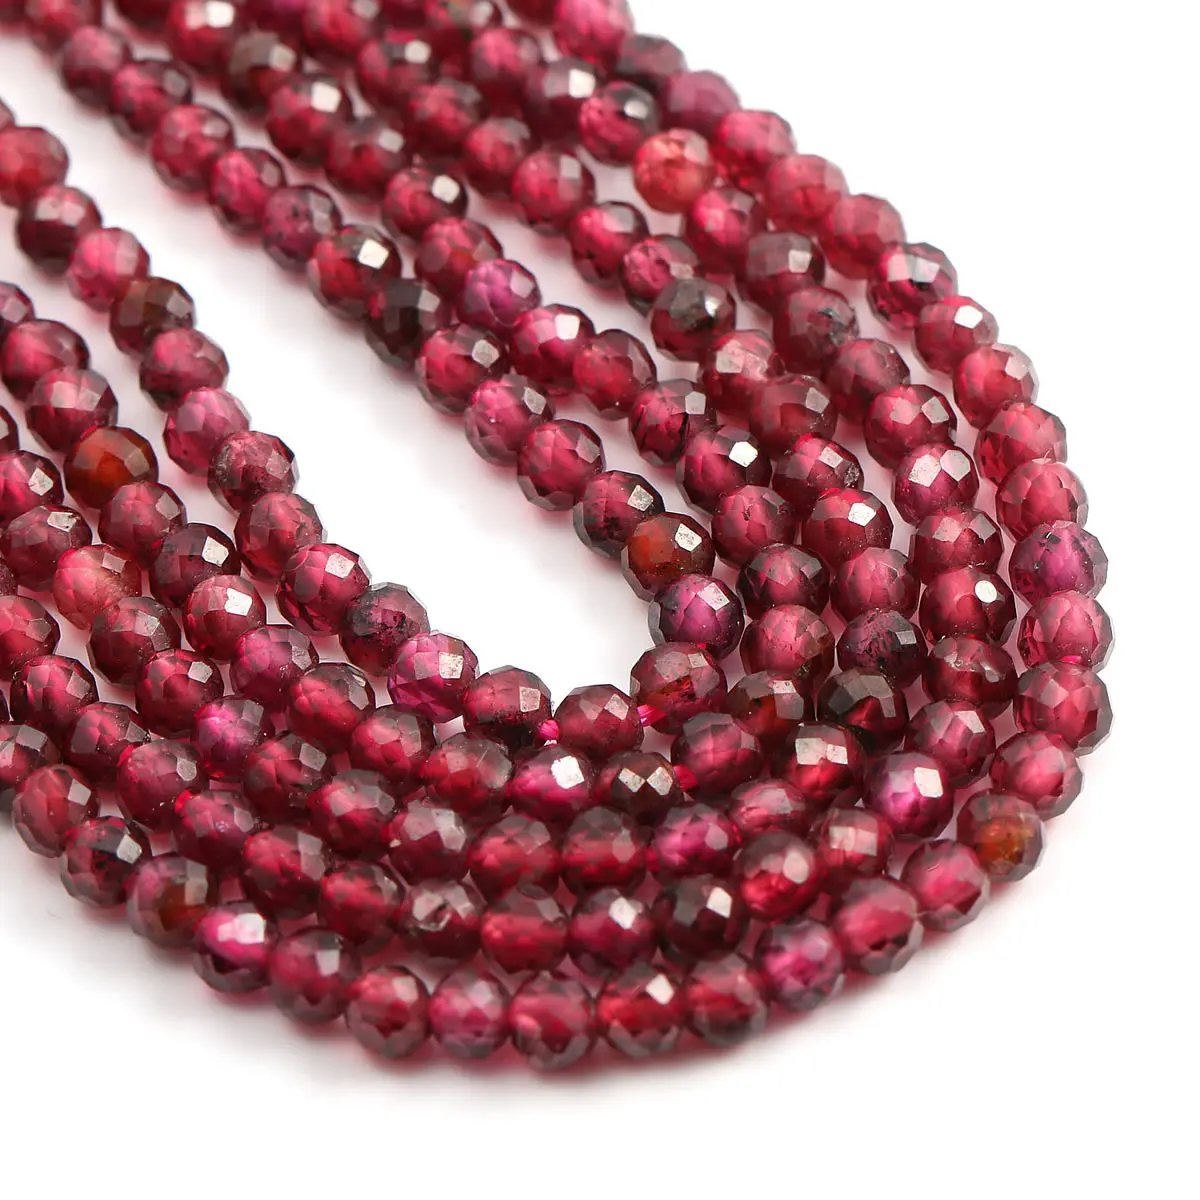 

Round Faceted Garnet Beads Natural Stone Spacer Bead Making for Women Jewelry DIY Bracelet Necklace Size 2mm 3mm 4mm 5mm